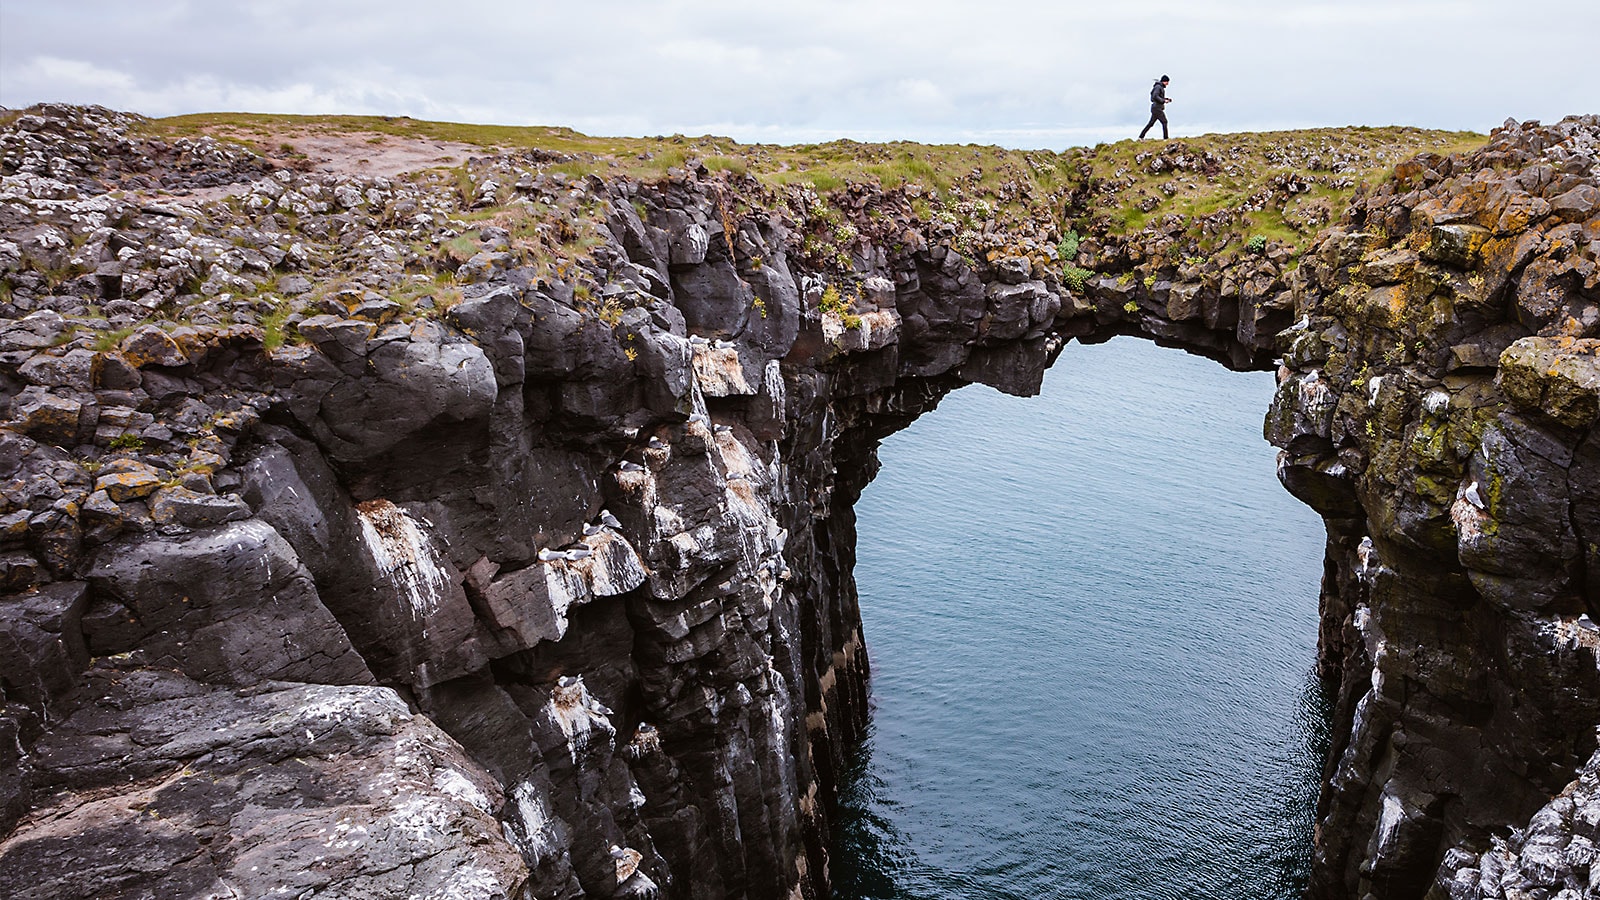 Man walking across a natural, stone bridge over water in Iceland